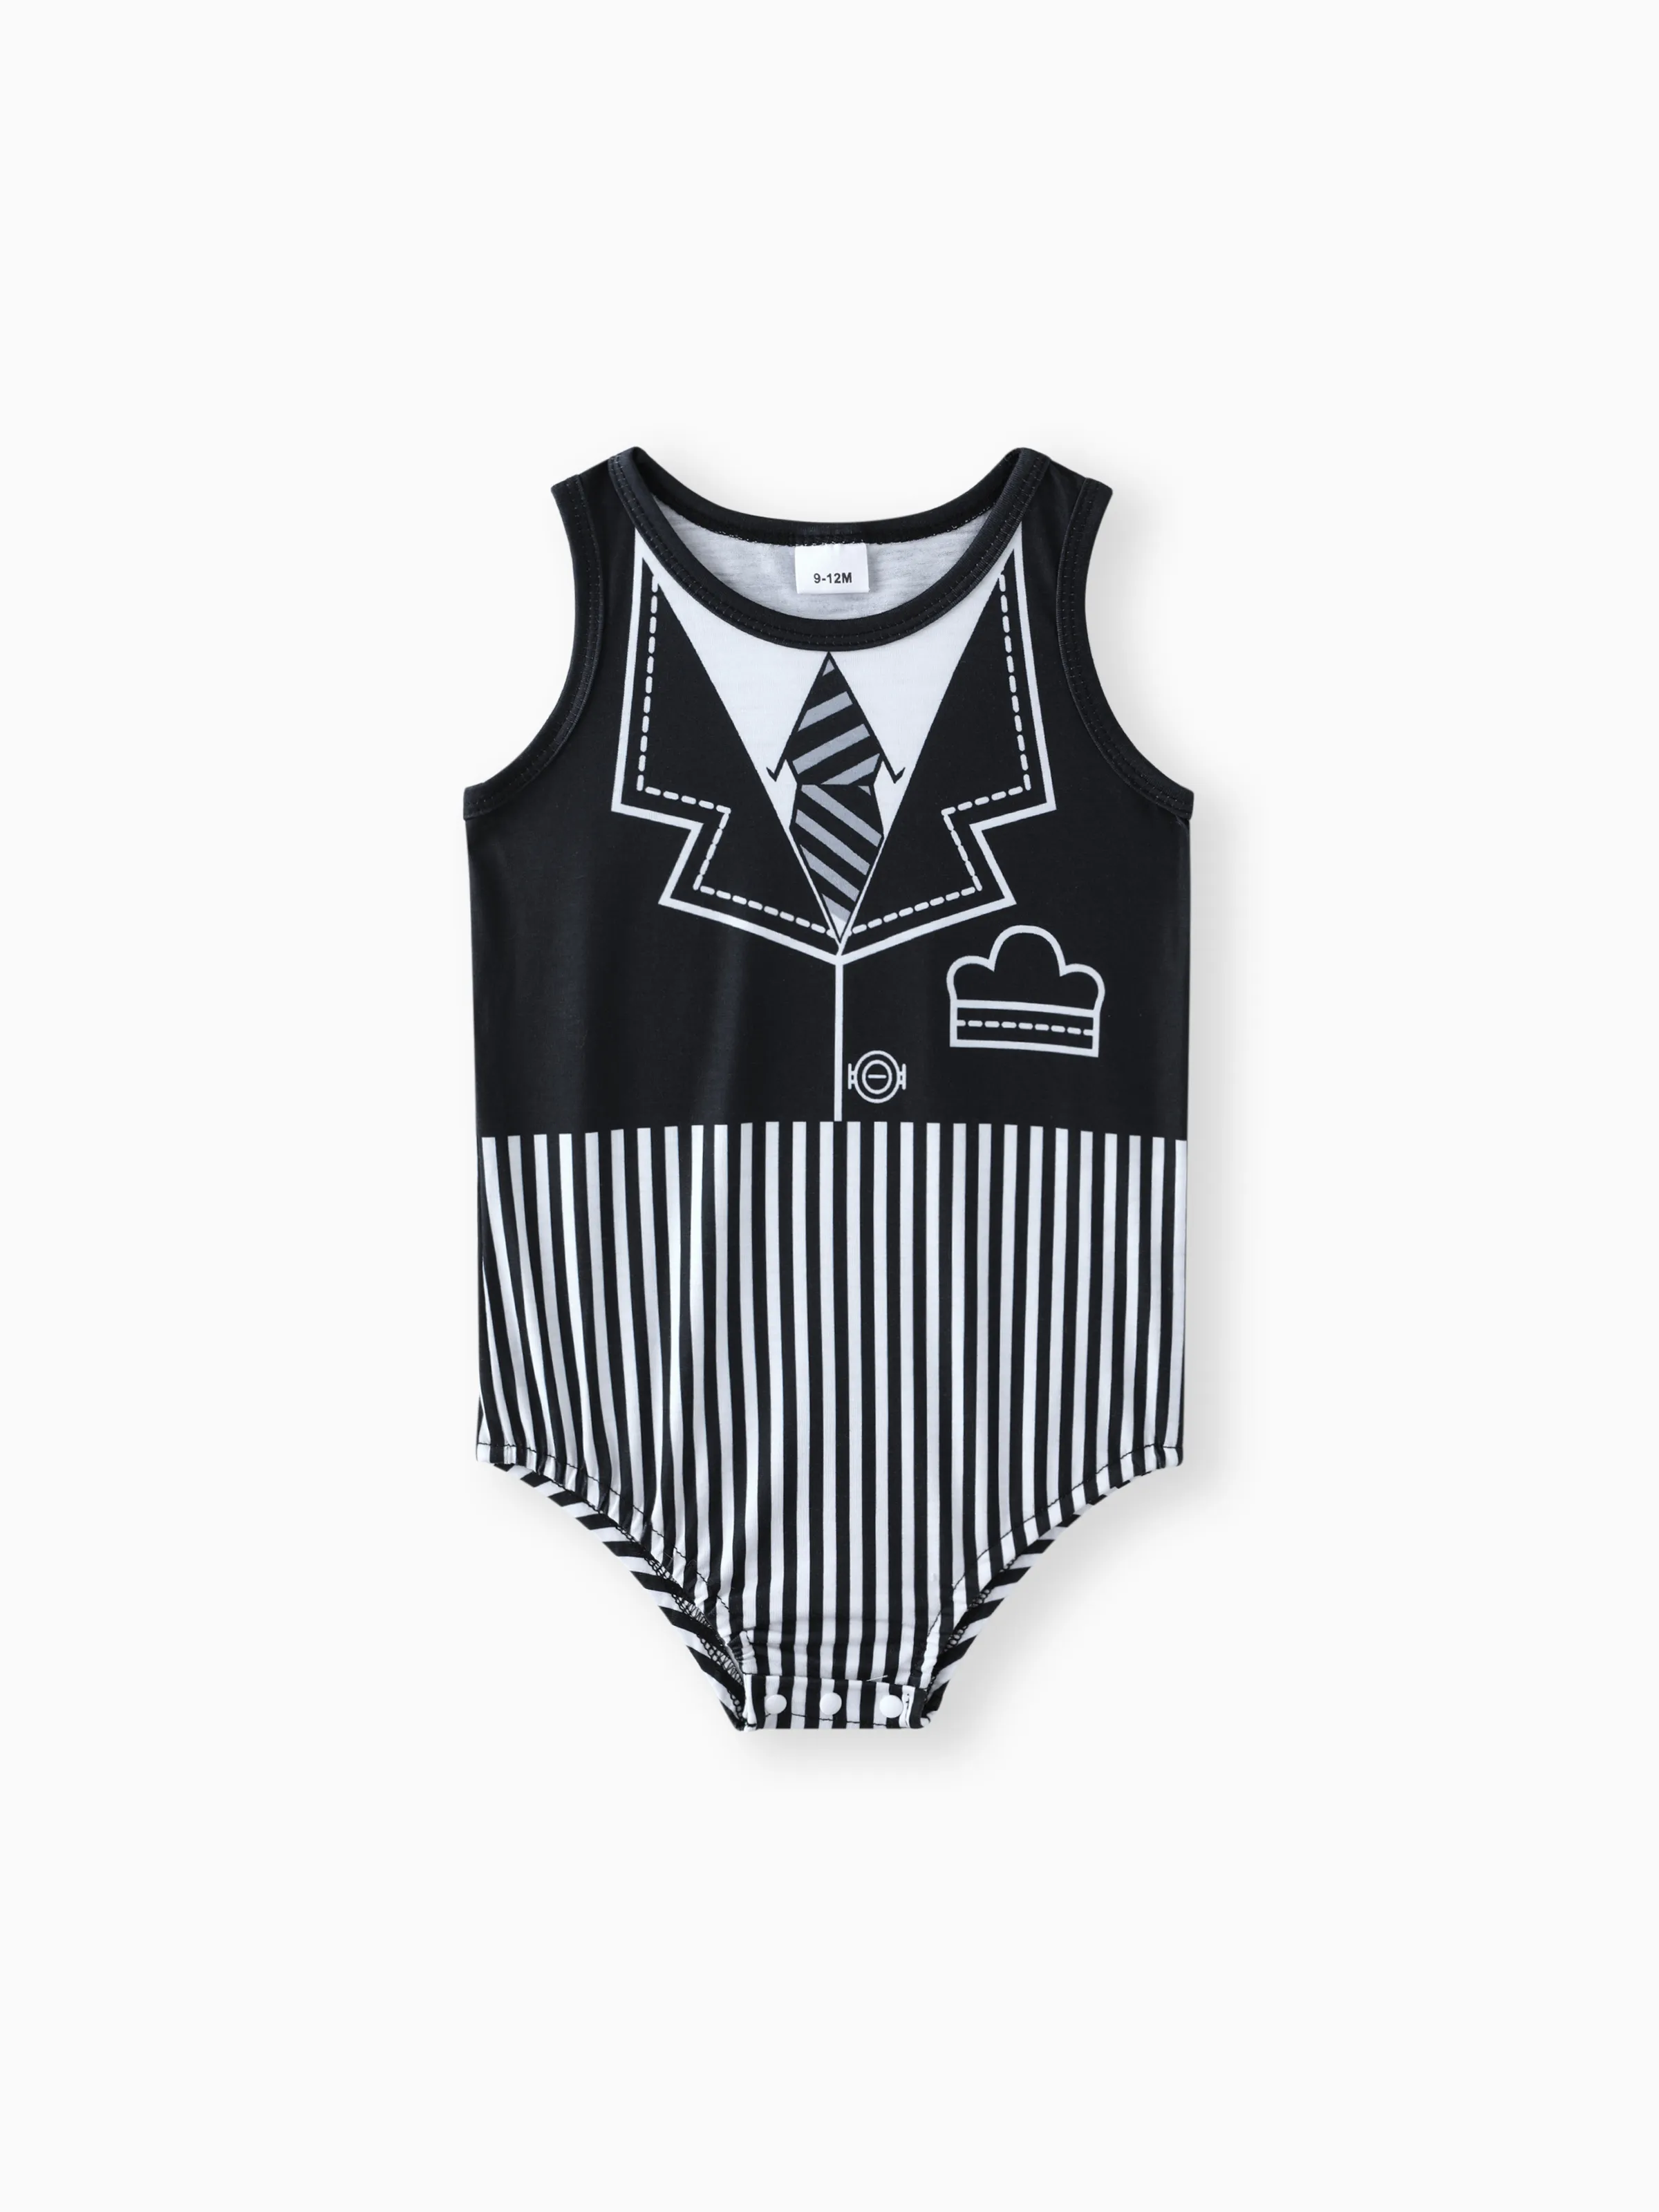 

Baby Boy 1pcs Basic Sleeveless Romper, Soft Polyester Material, Colorfast and Durable